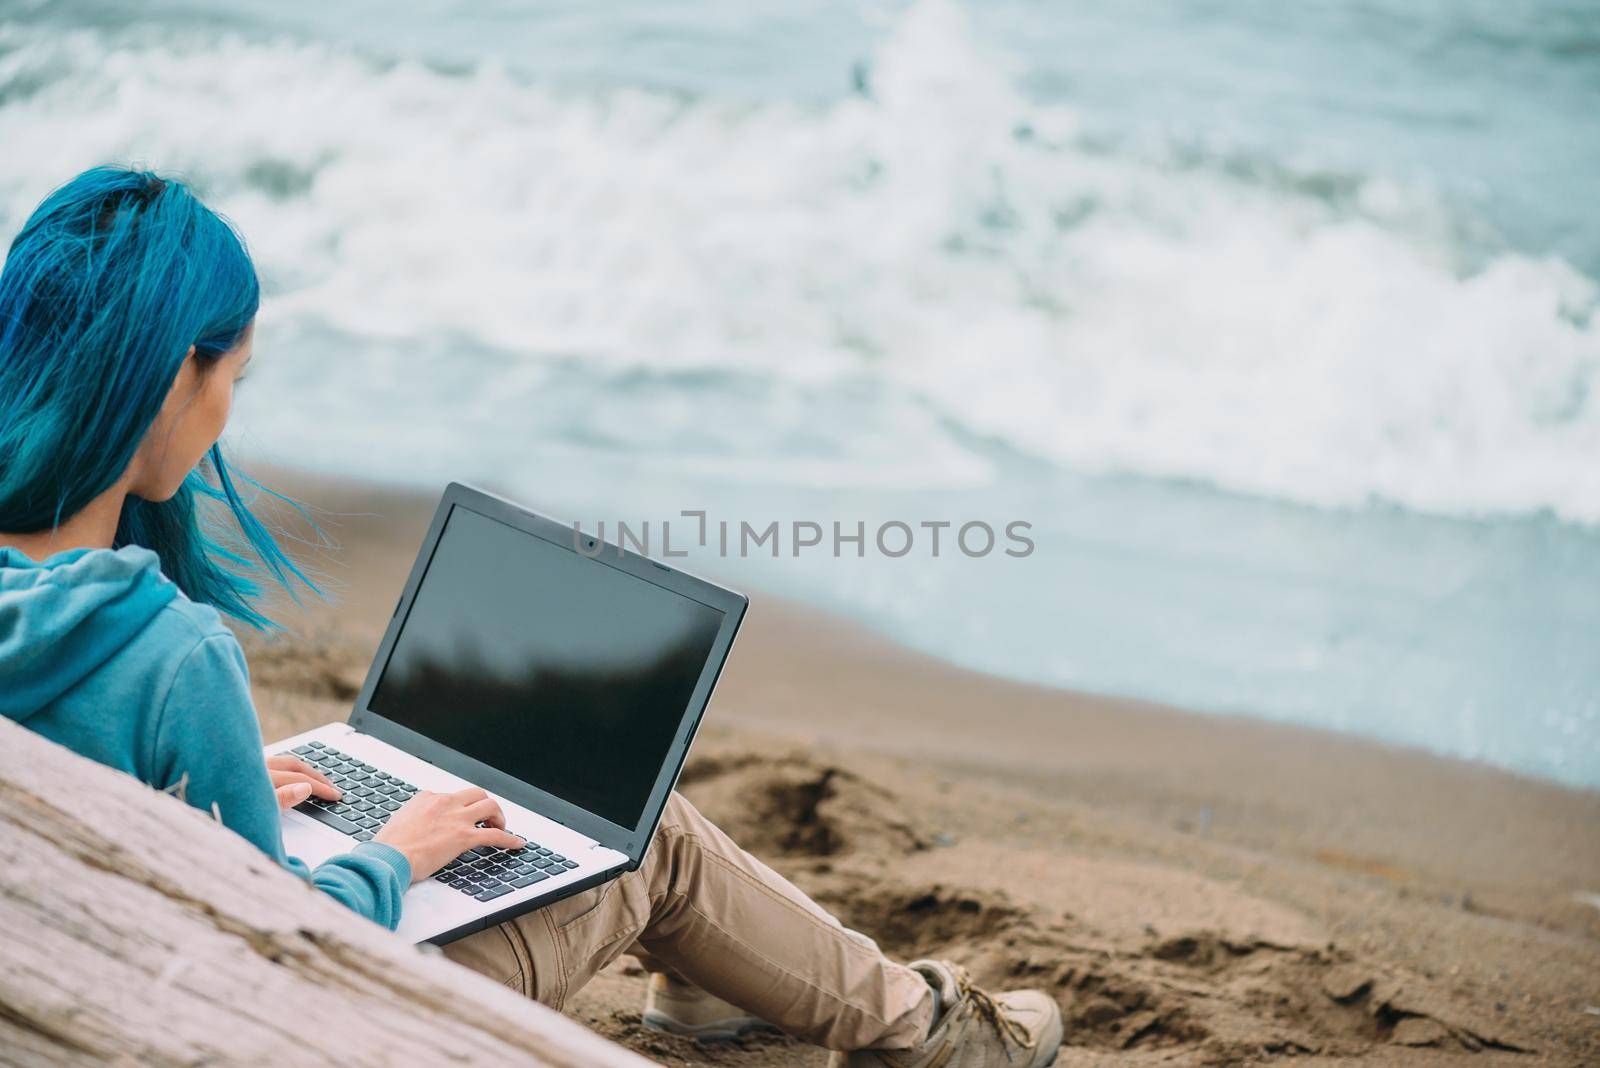 Freelancer young woman with blue hair working on laptop on beach near the sea. Freelance concept. Focus on hand